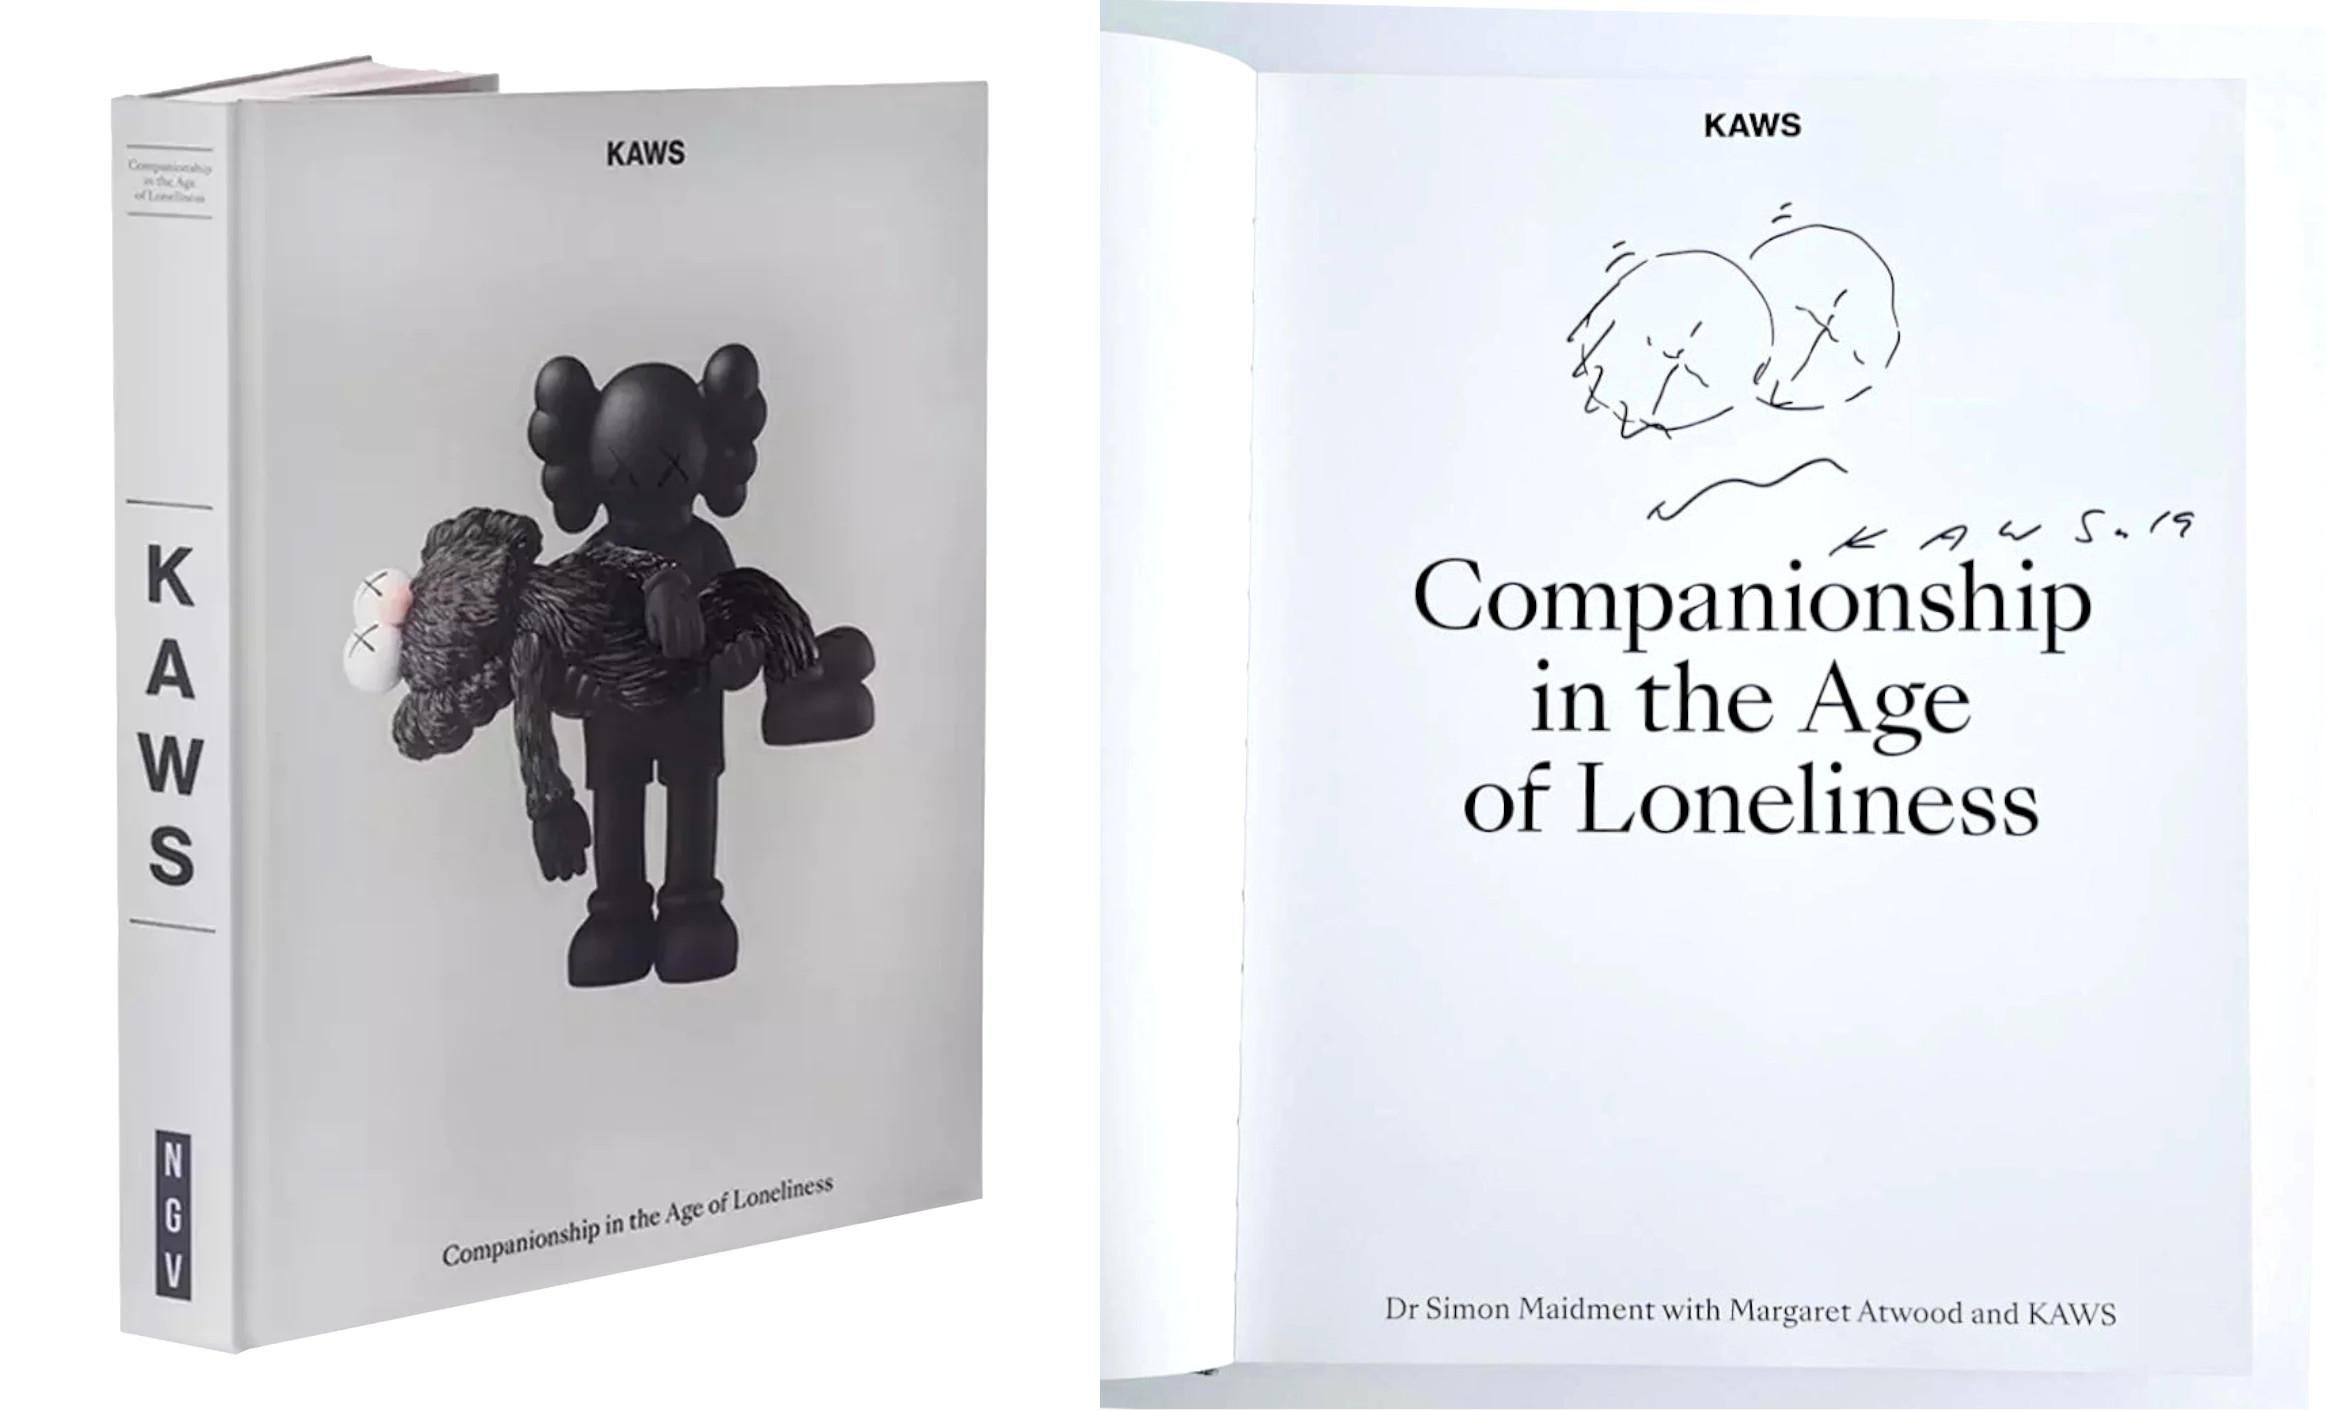 Original (unique) signed and dated drawing held in Australian monograph - Art by KAWS